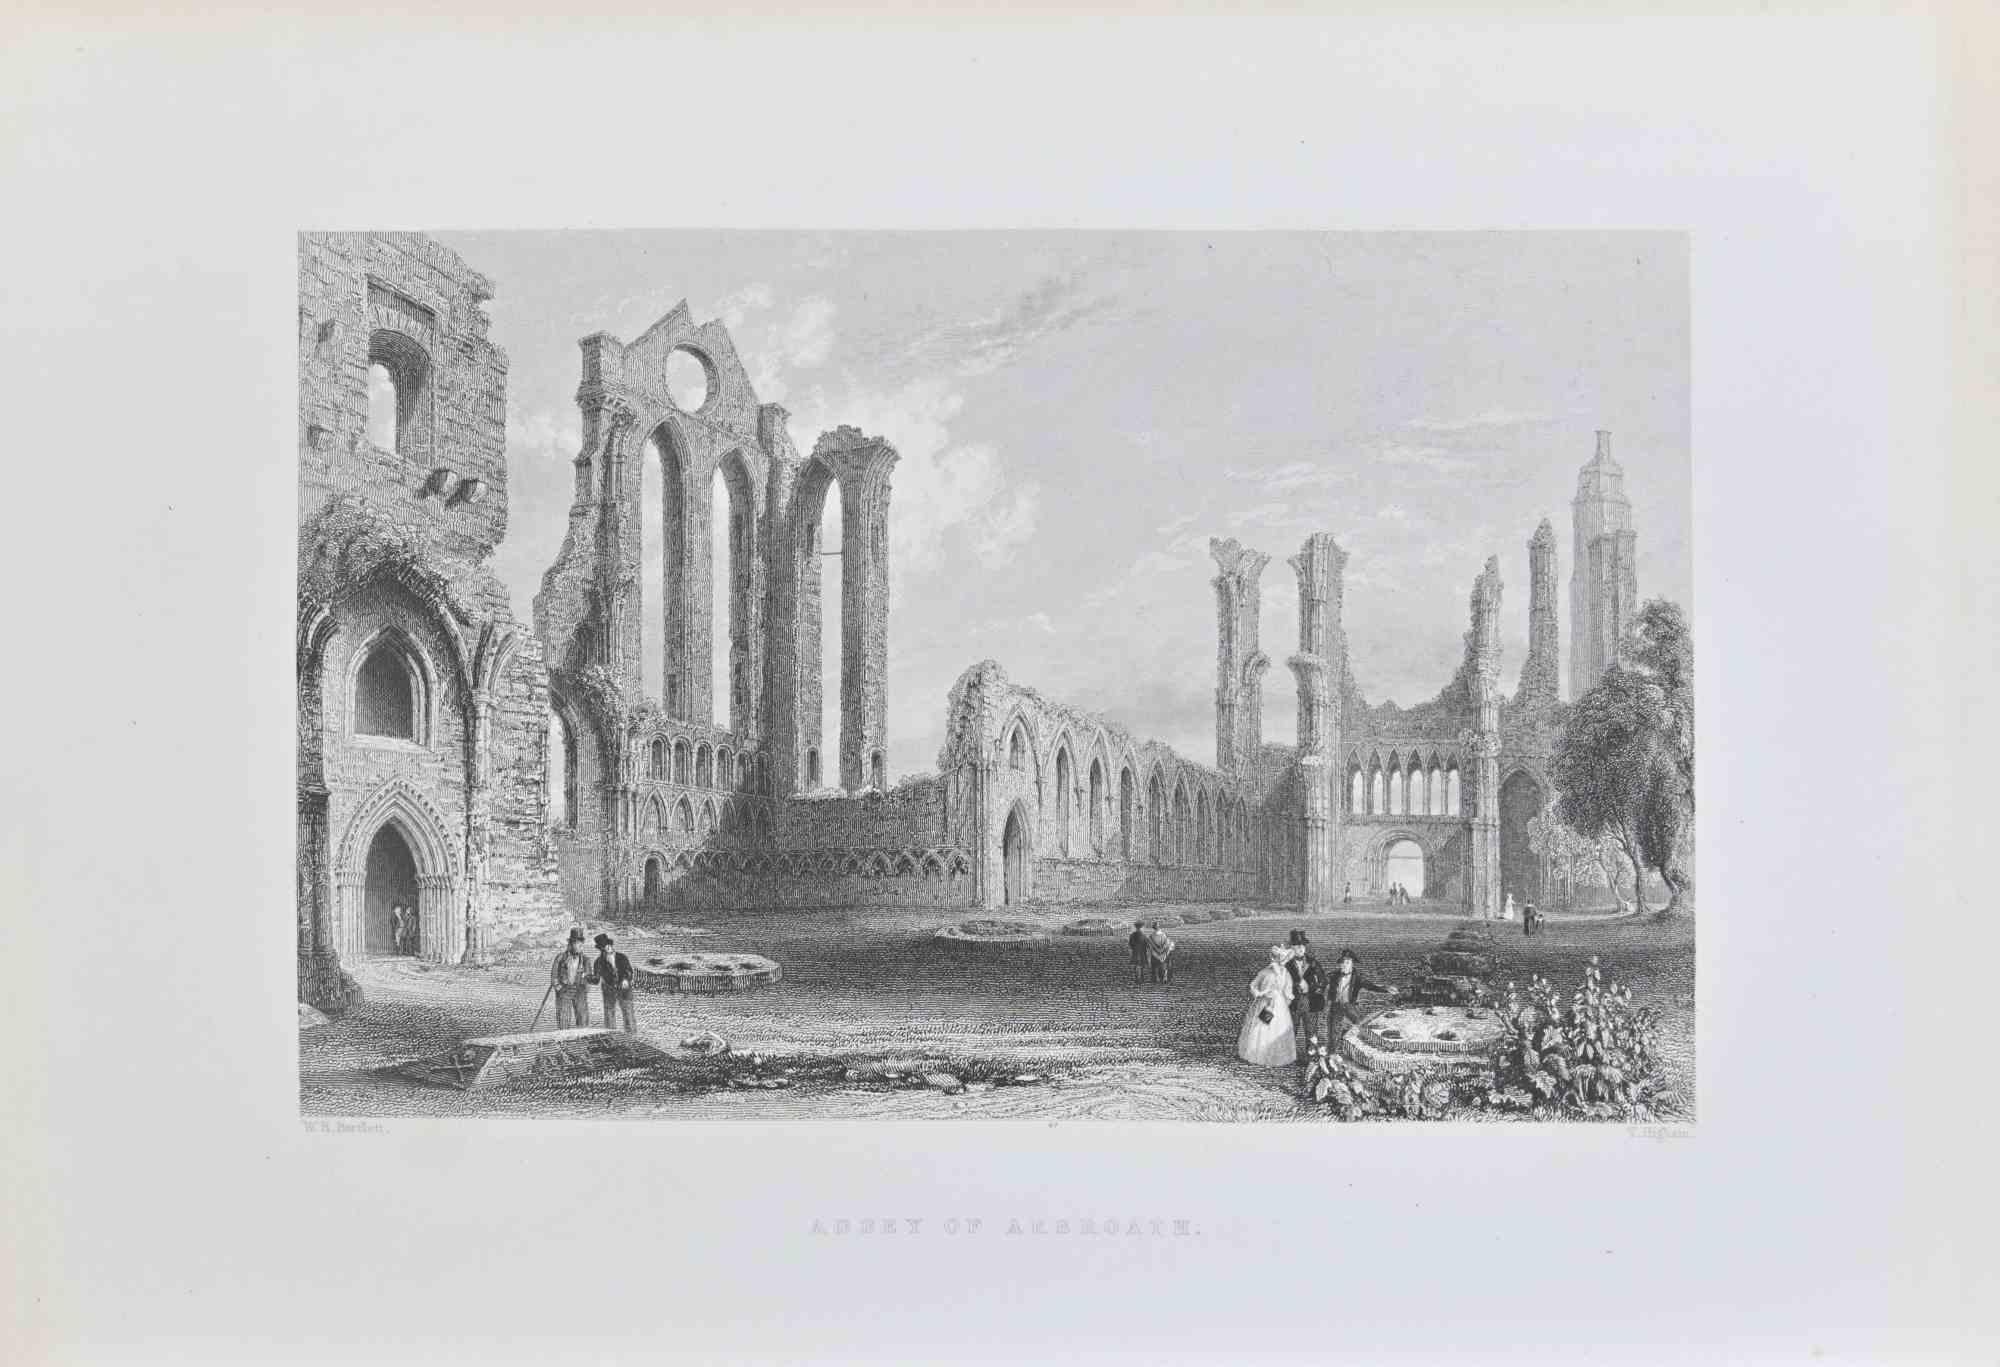 Abbey of Arbroath is an engraving on paper realized by T. Higham in 1838.

The artwork is in good condition.

The artwork is depicted in a well-balanced composition.
